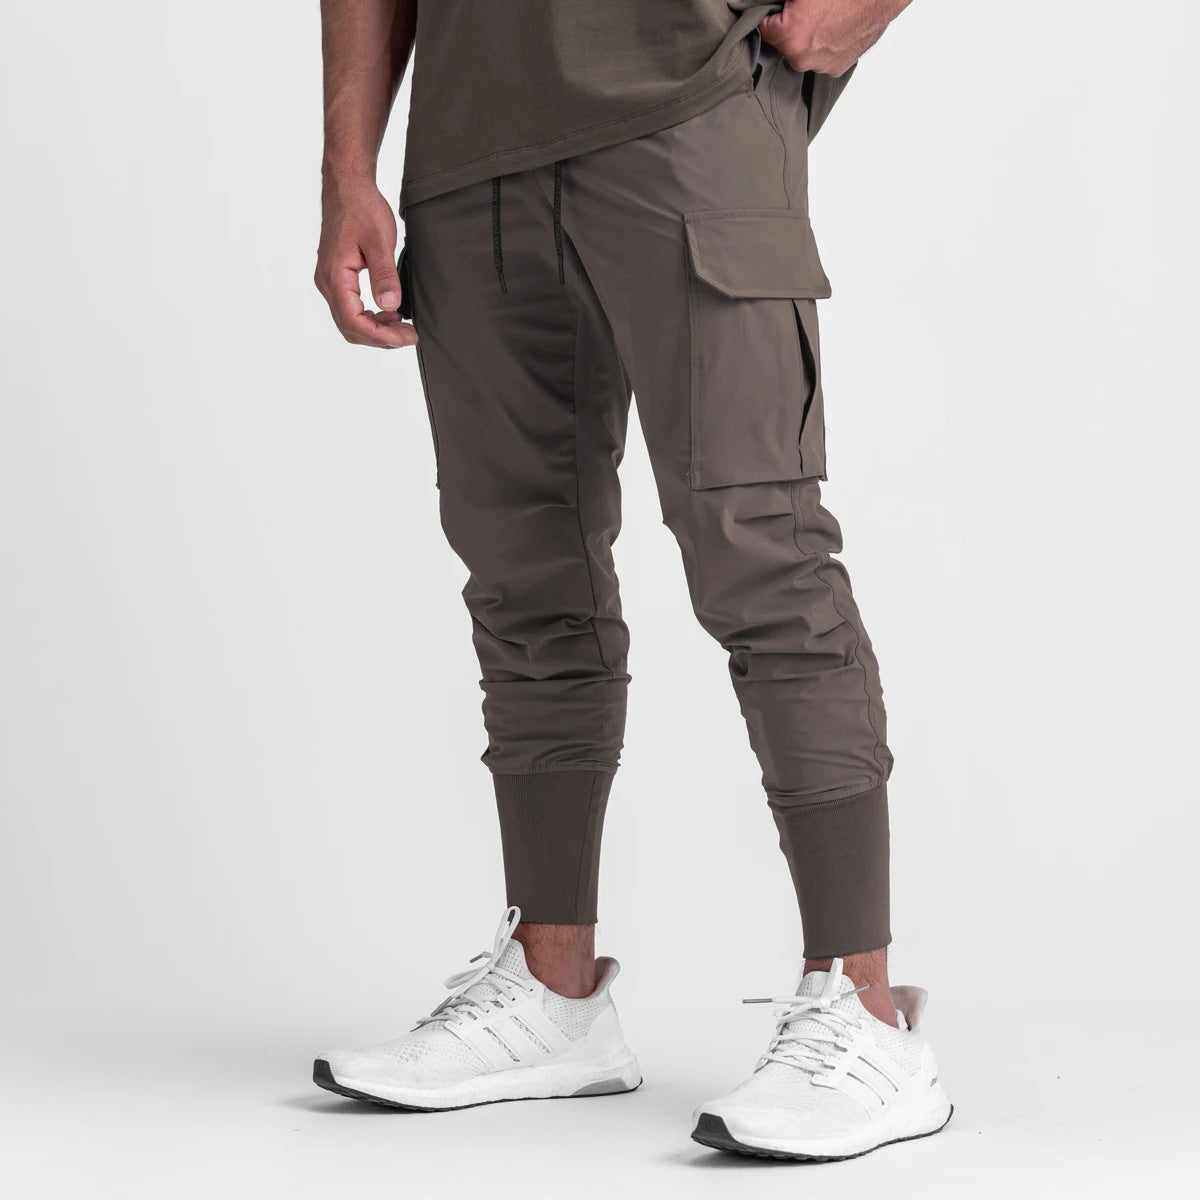 Men's Fitness Casual Pants - Lightweight and Moisture-Wicking